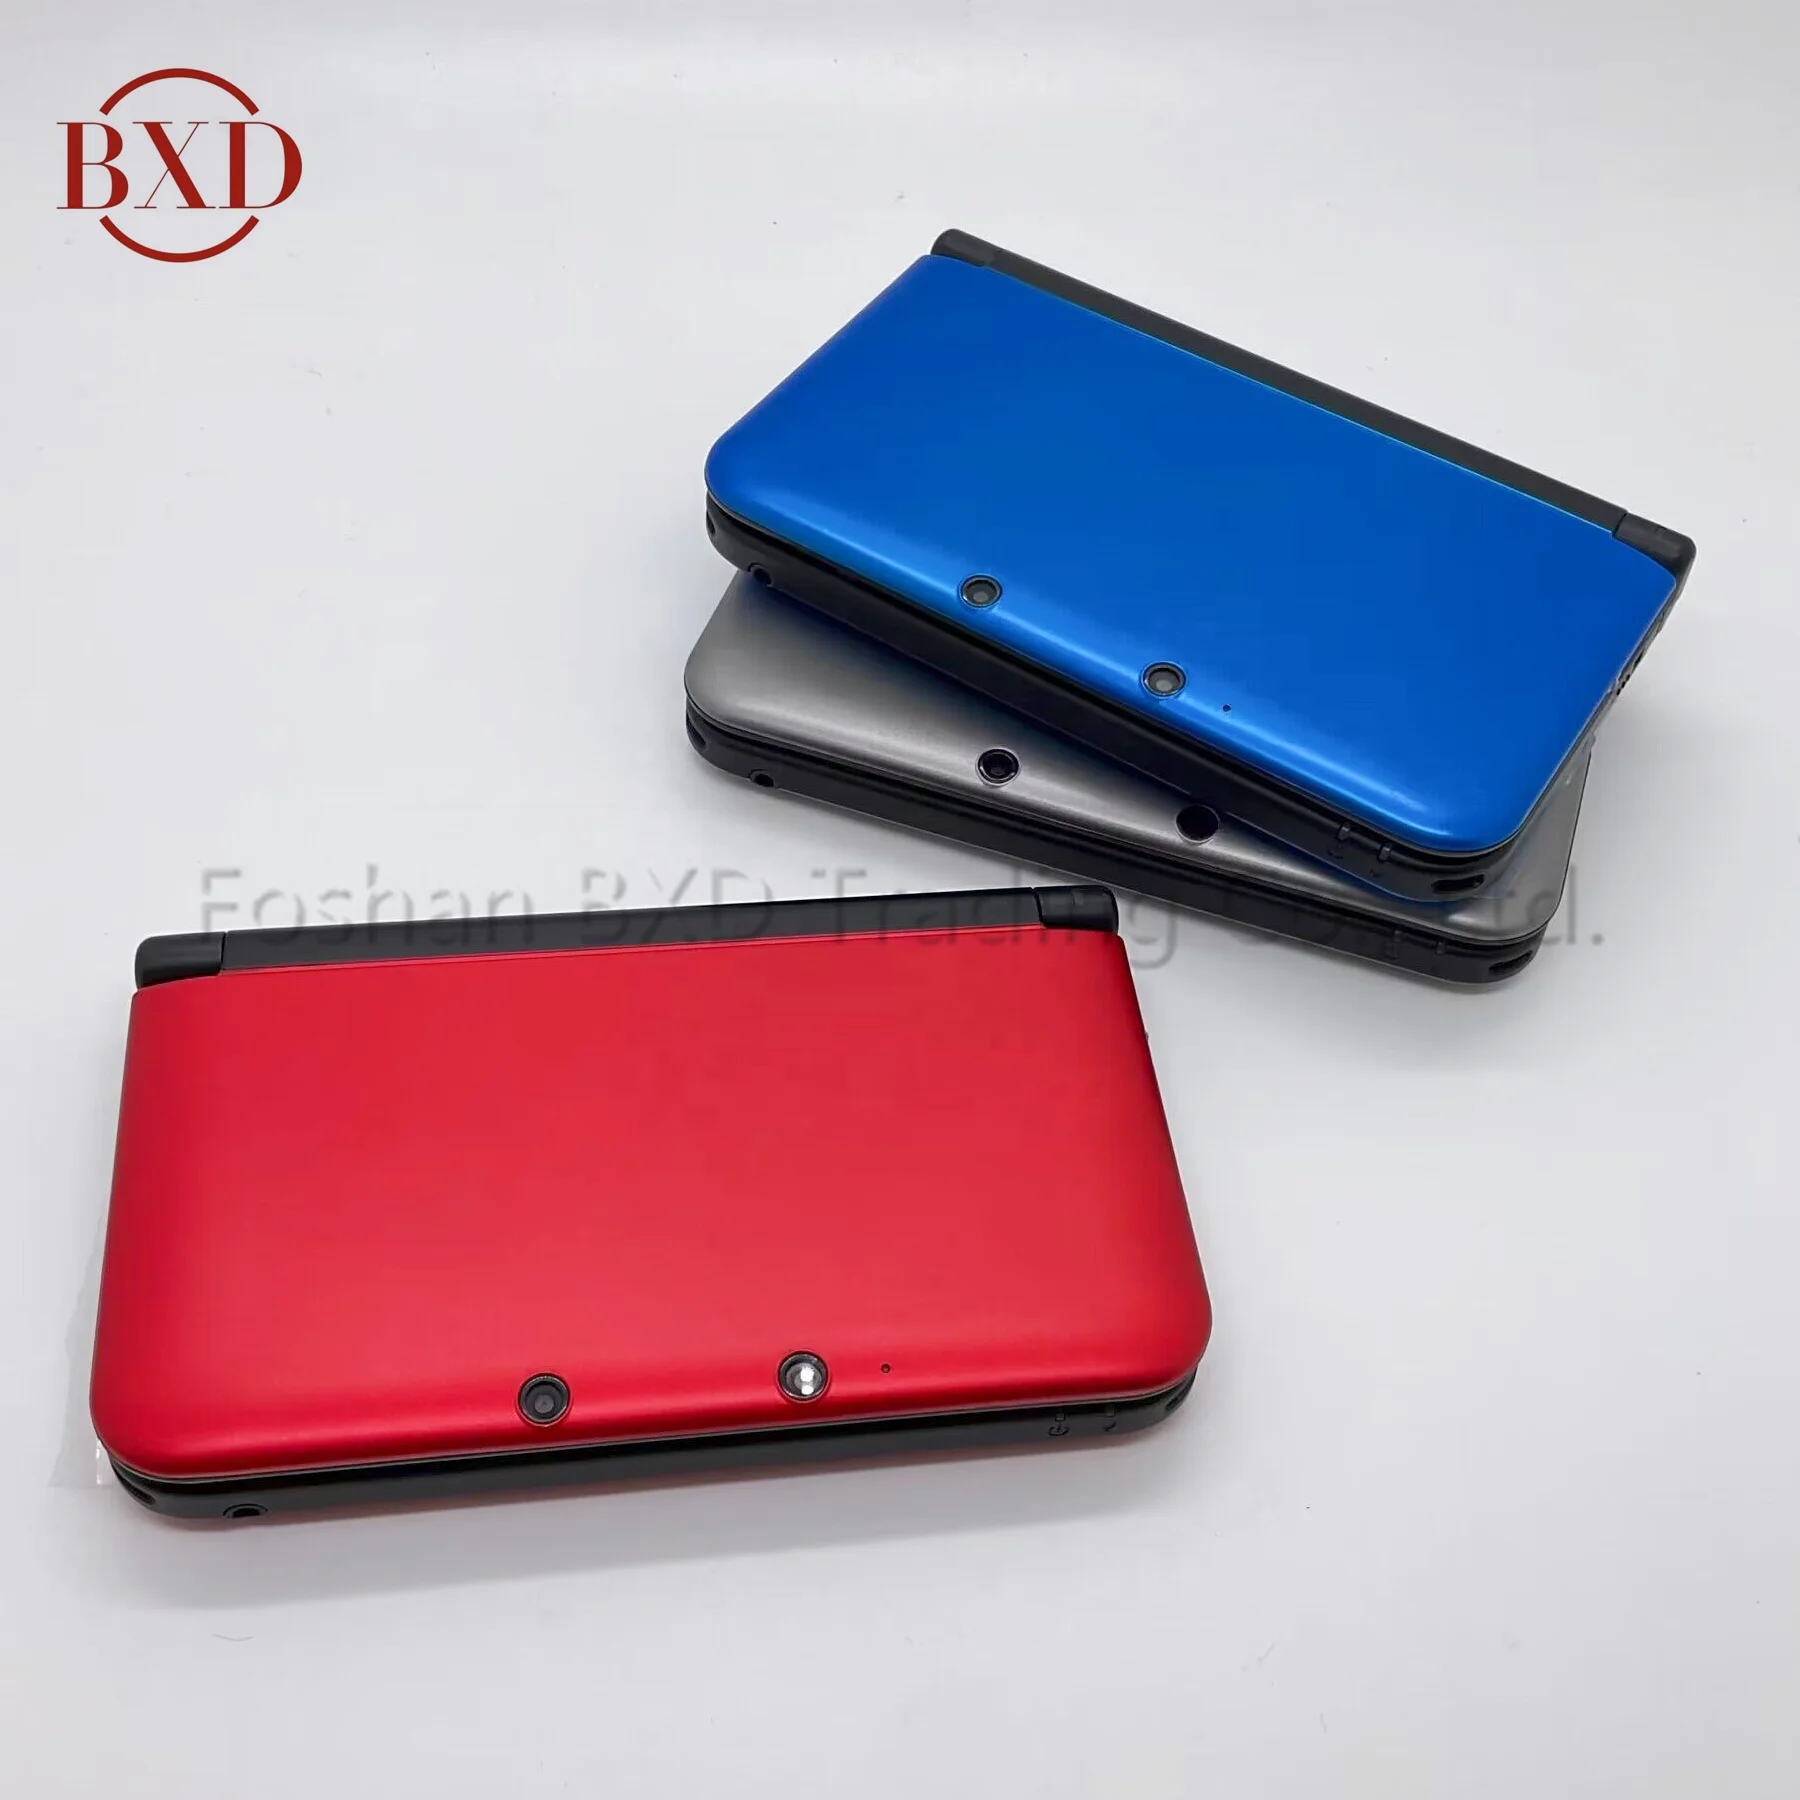 for 3DS XL video games console for Nintendo 3DSXL LL Handheld game console